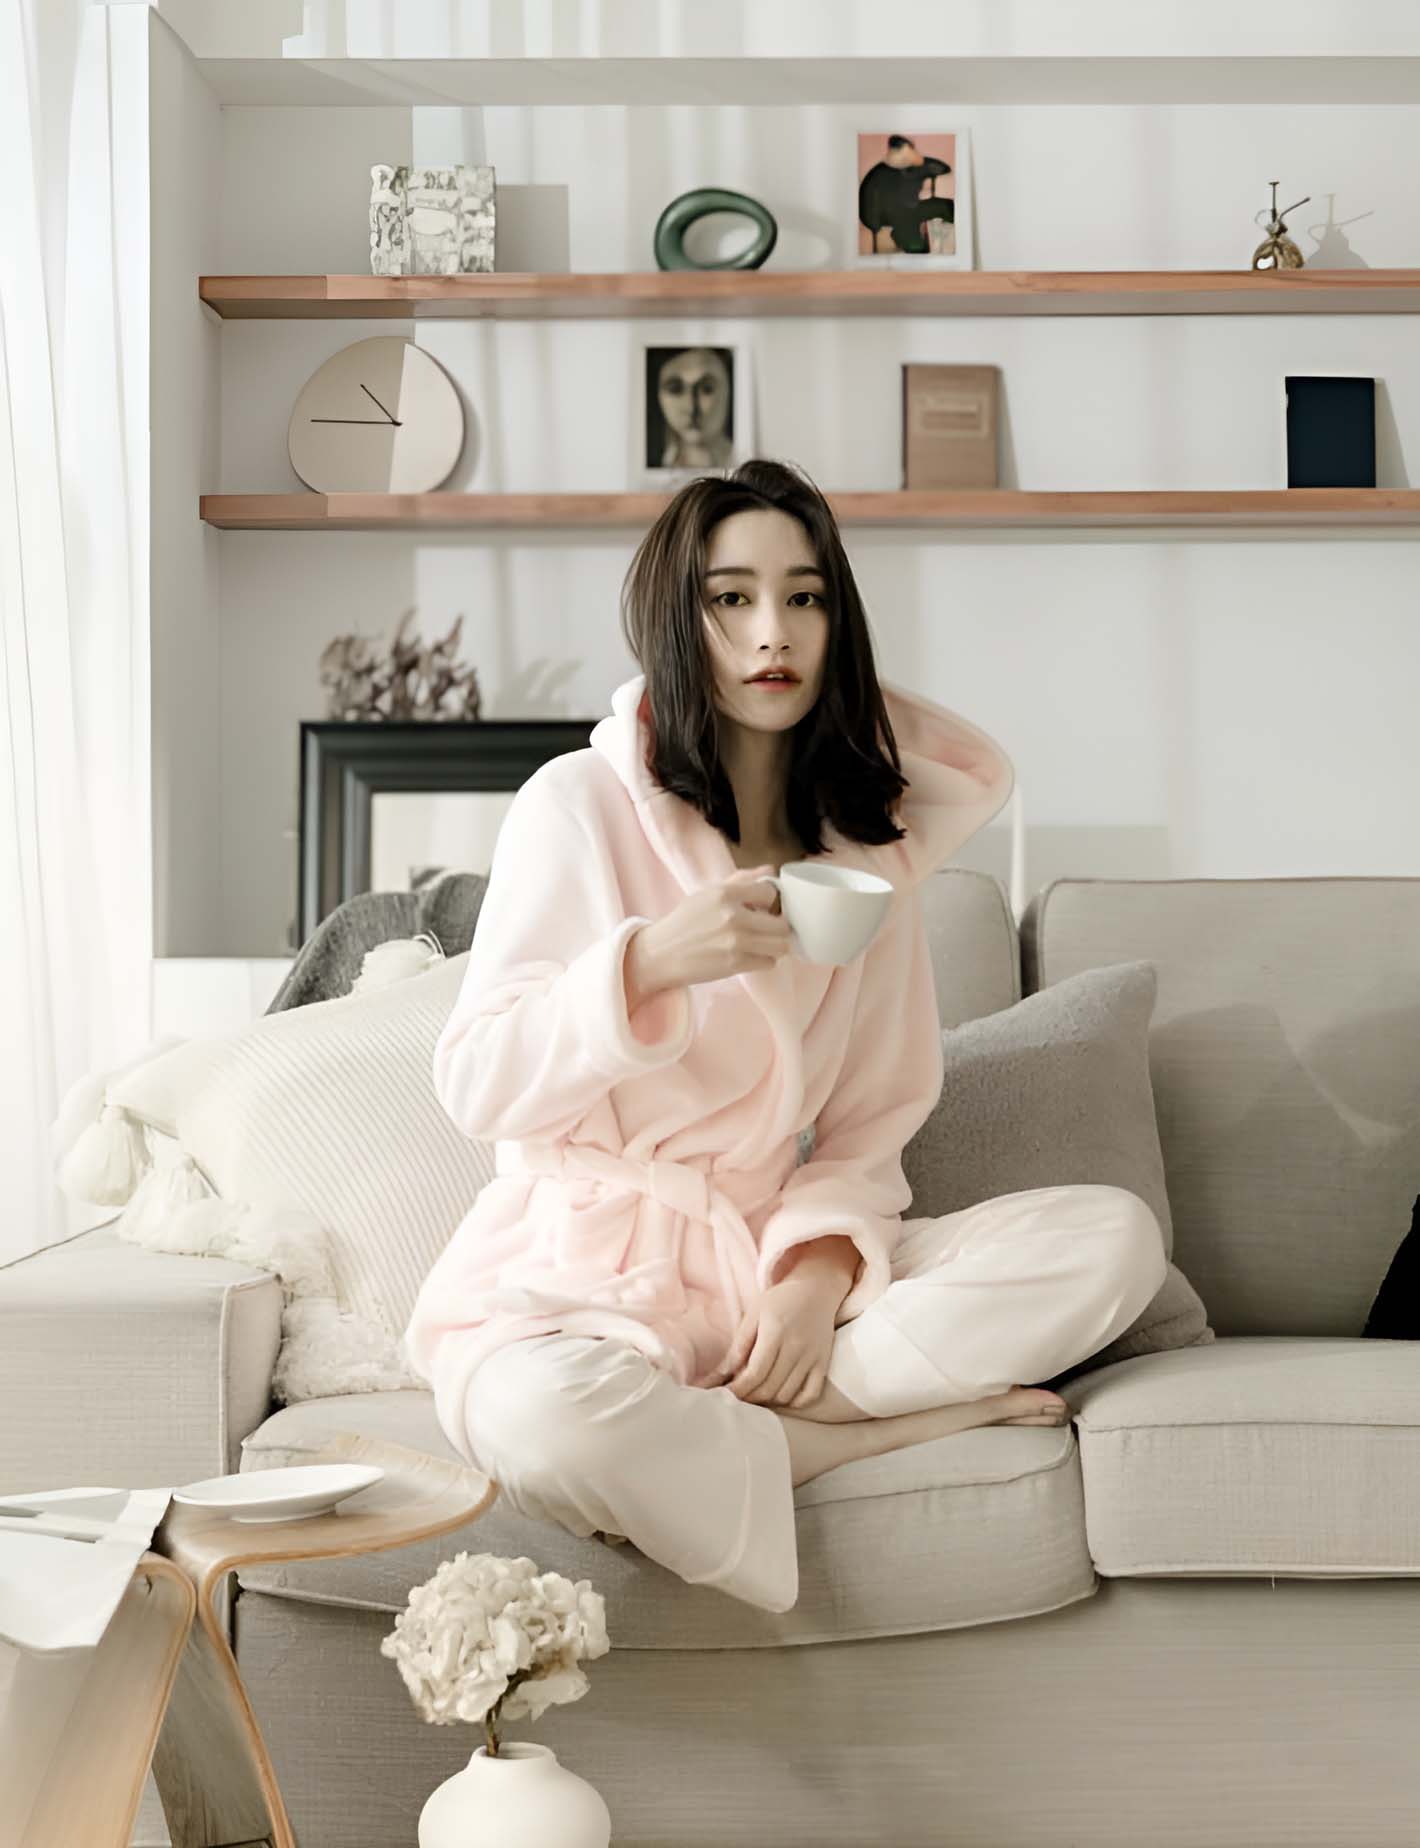 Asian woman modelling a sixty eight dressing gown in a living room setting.